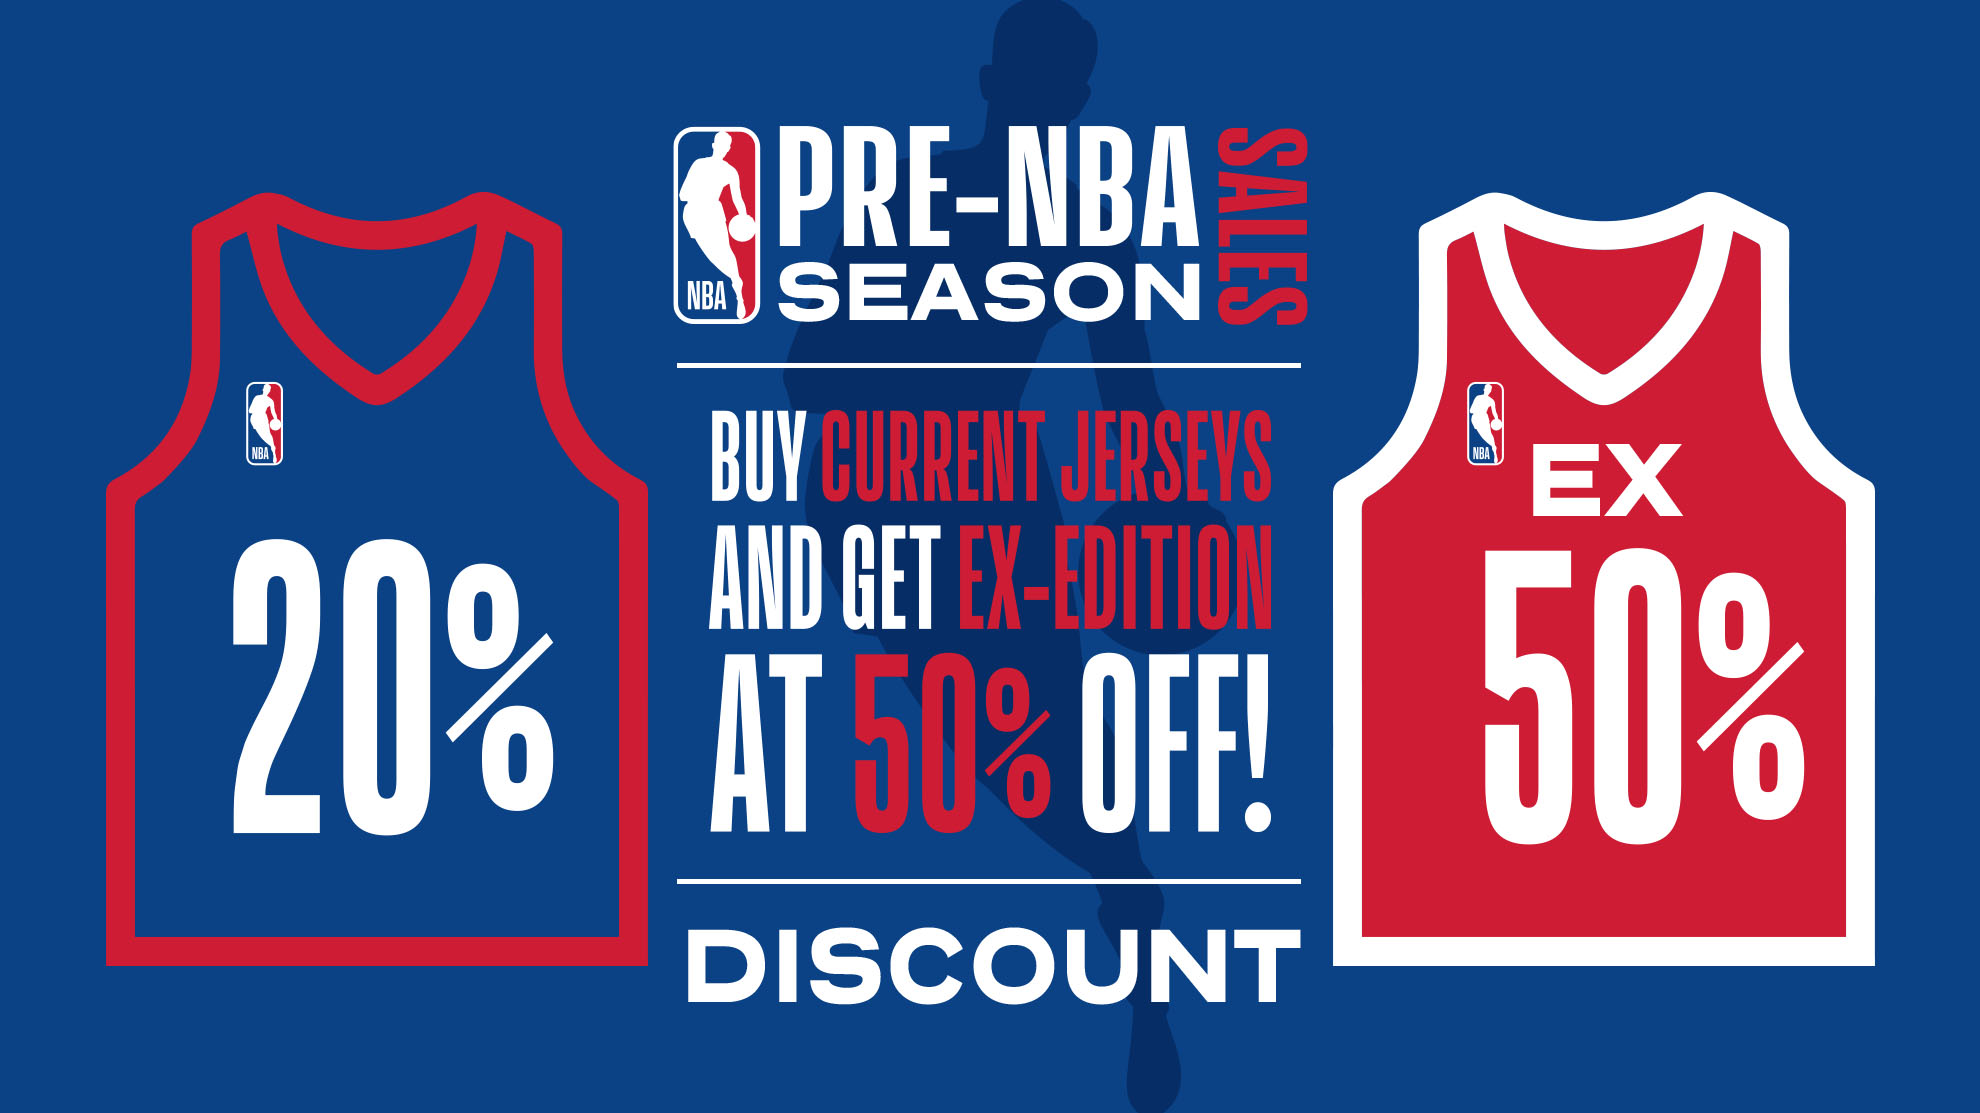 Buy current jerseys and get ex-edition ones at 50 Percent off